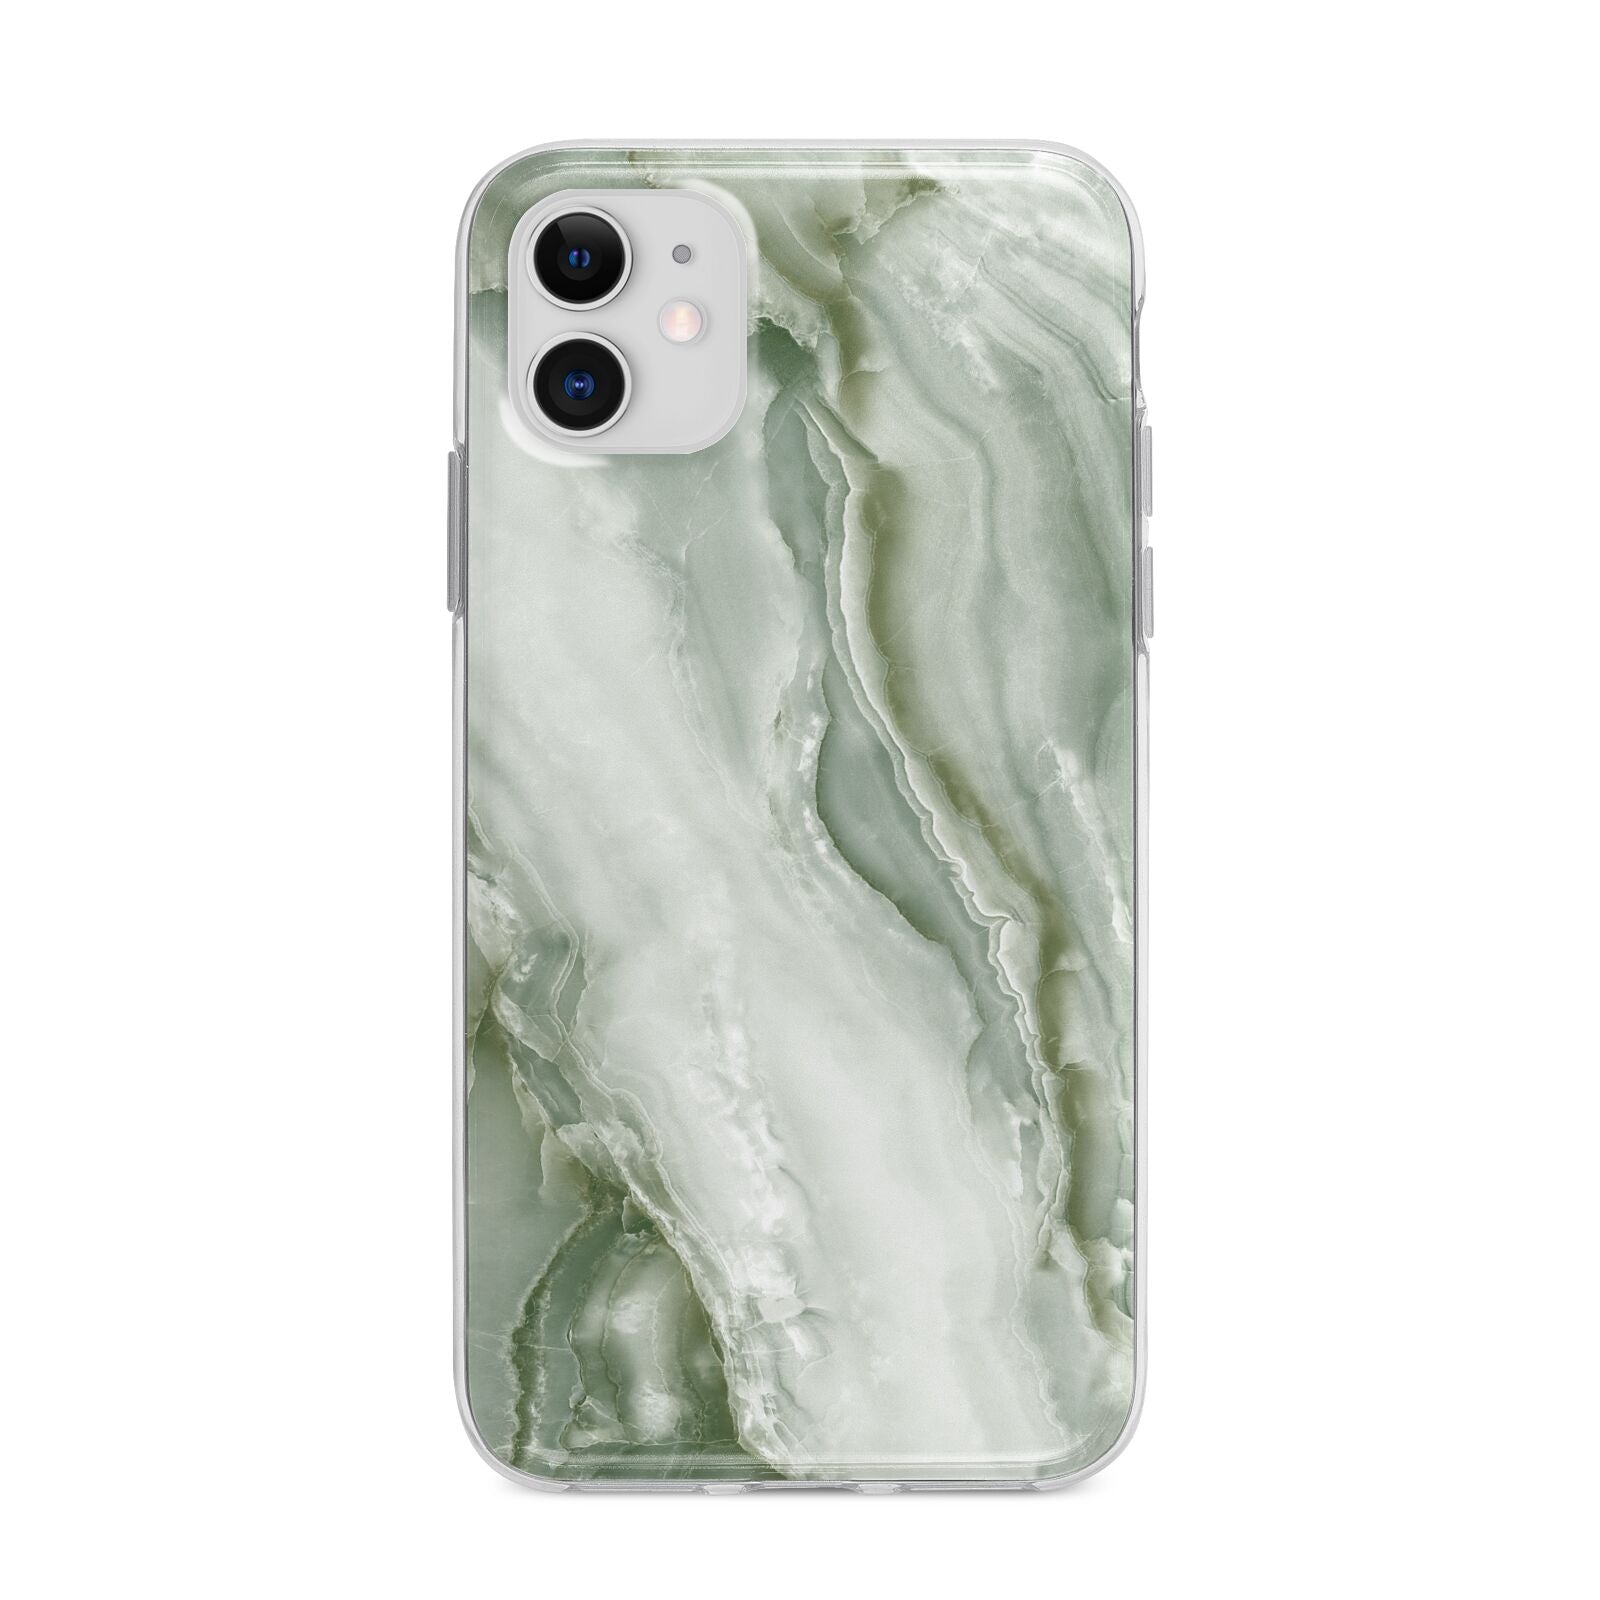 Pistachio Green Marble Apple iPhone 11 in White with Bumper Case